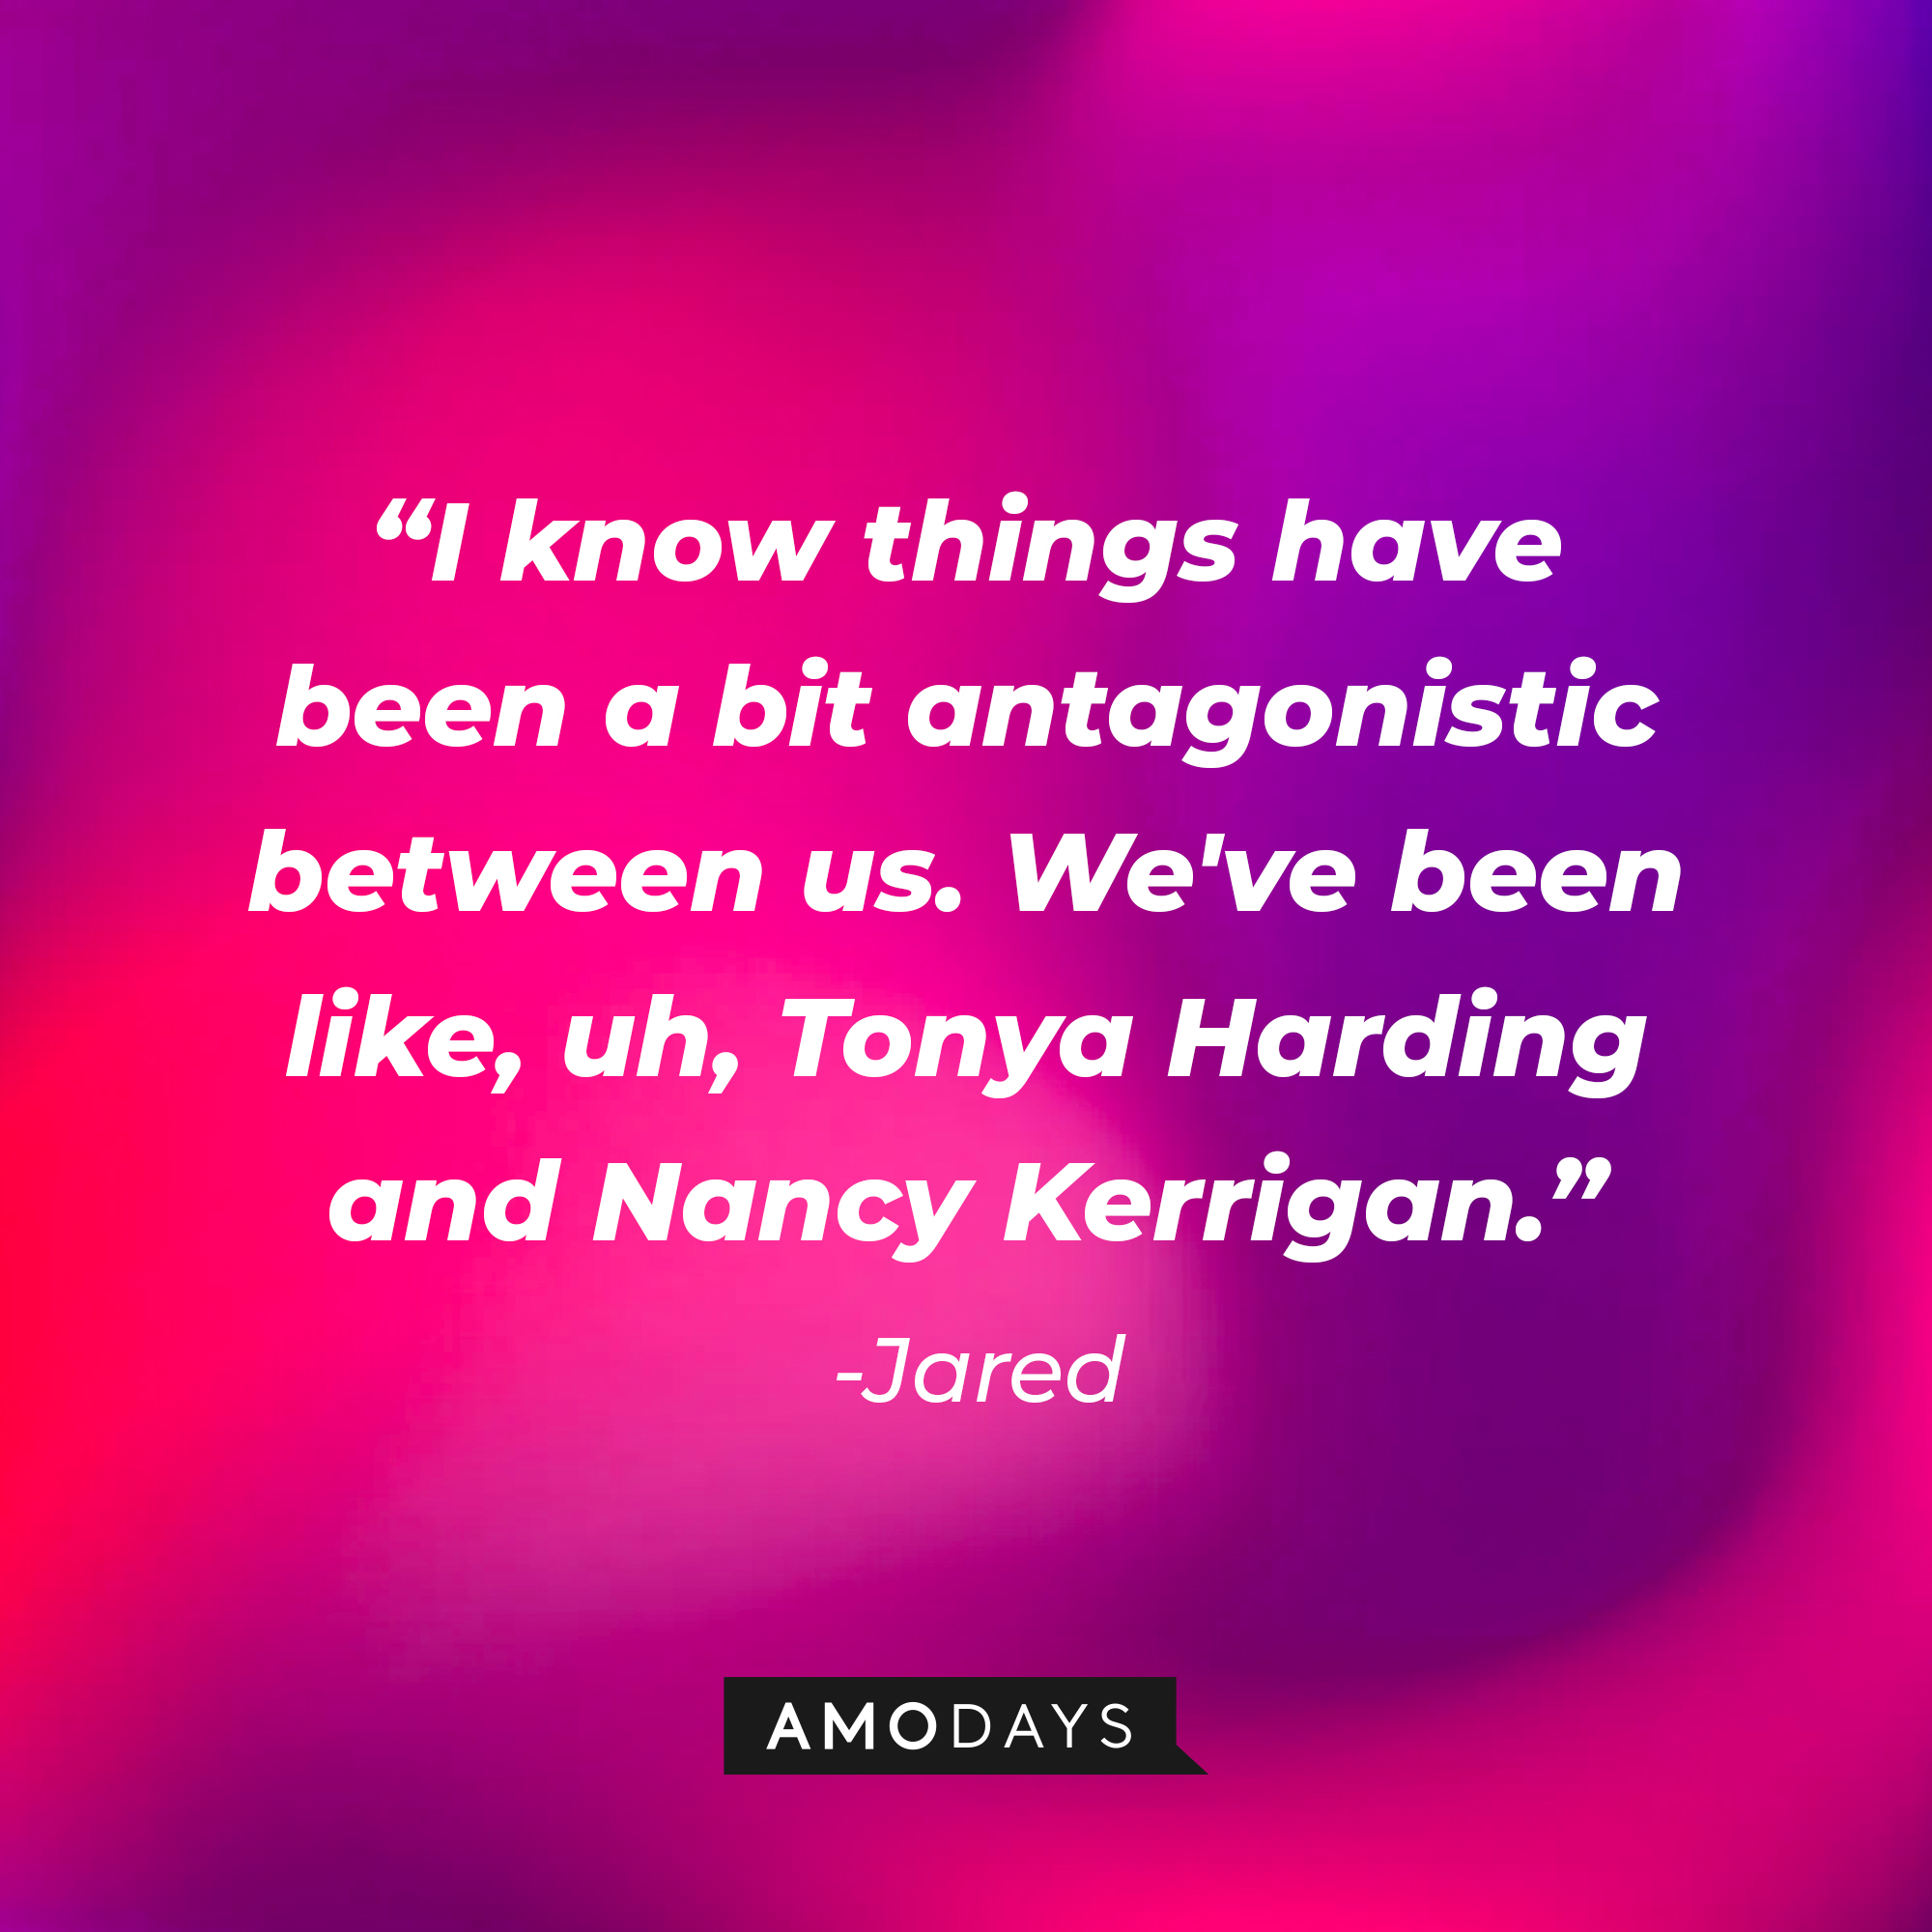 Jared's quote: “I know things have been a bit antagonistic between us. We've been like, uh, Tonya Harding and Nancy Kerrigan.” | Source: Amodays